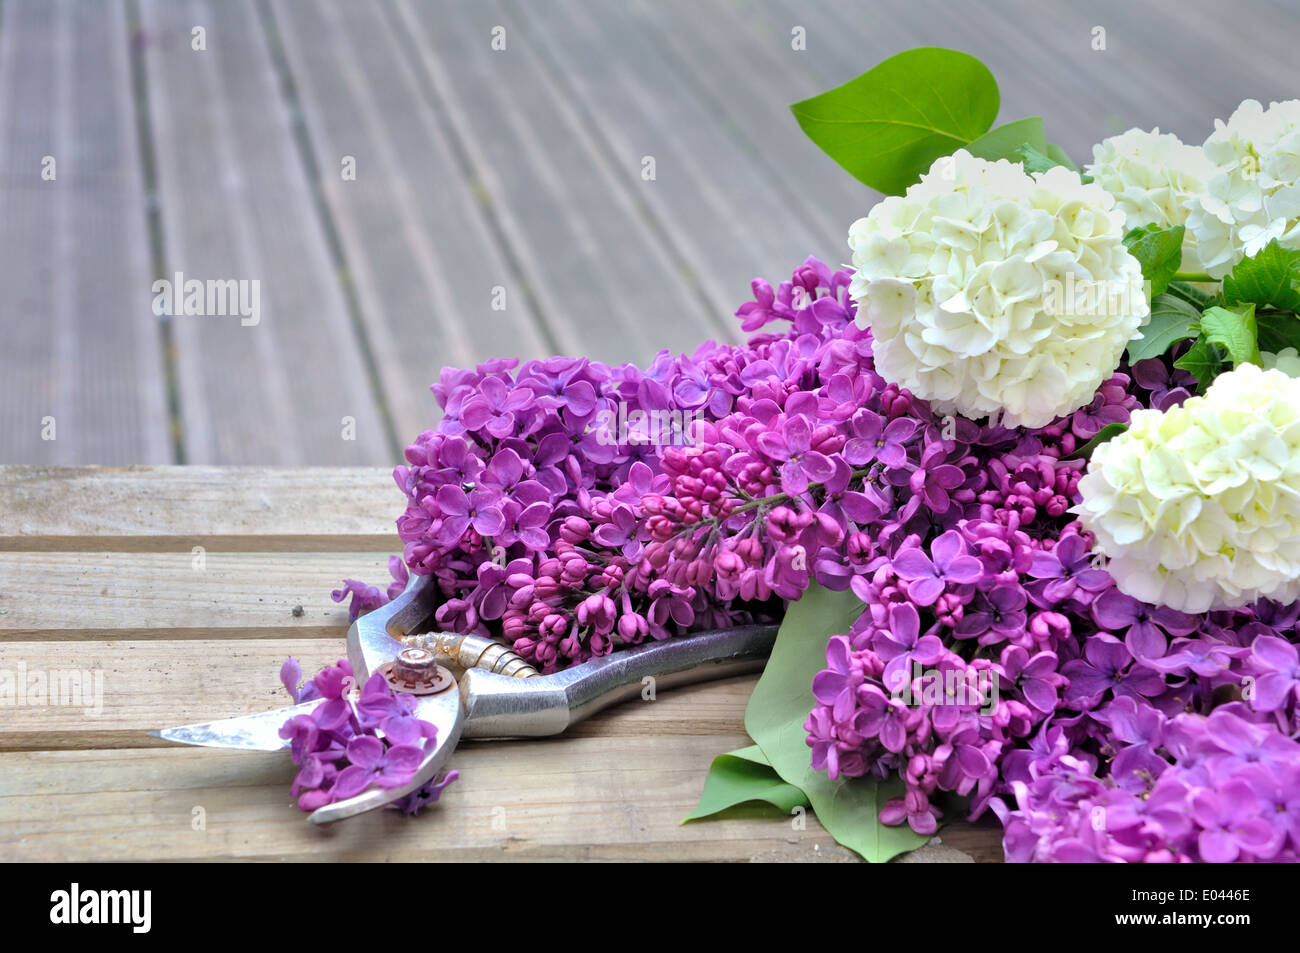 lilac flowers freshly picked on wooden board Stock Photo